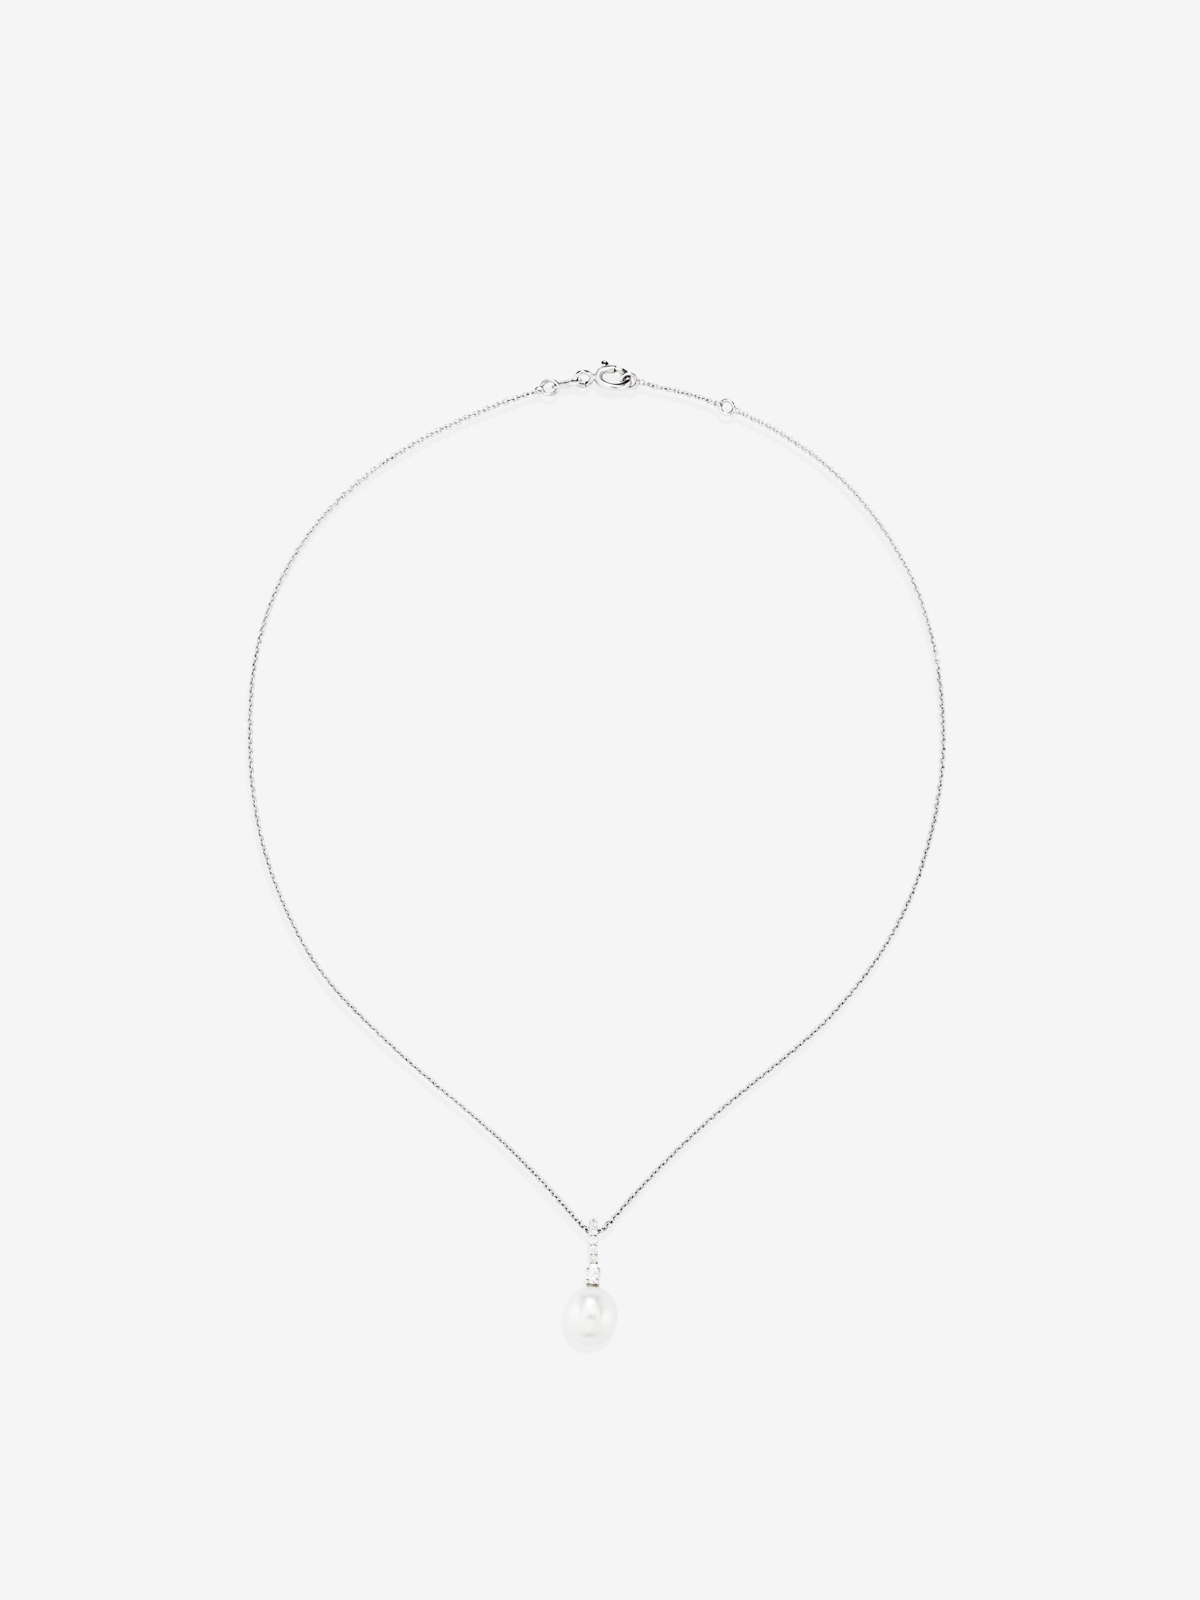 18k white gold chain pendant with diamond hoop and 8.5 mm Australian pearl